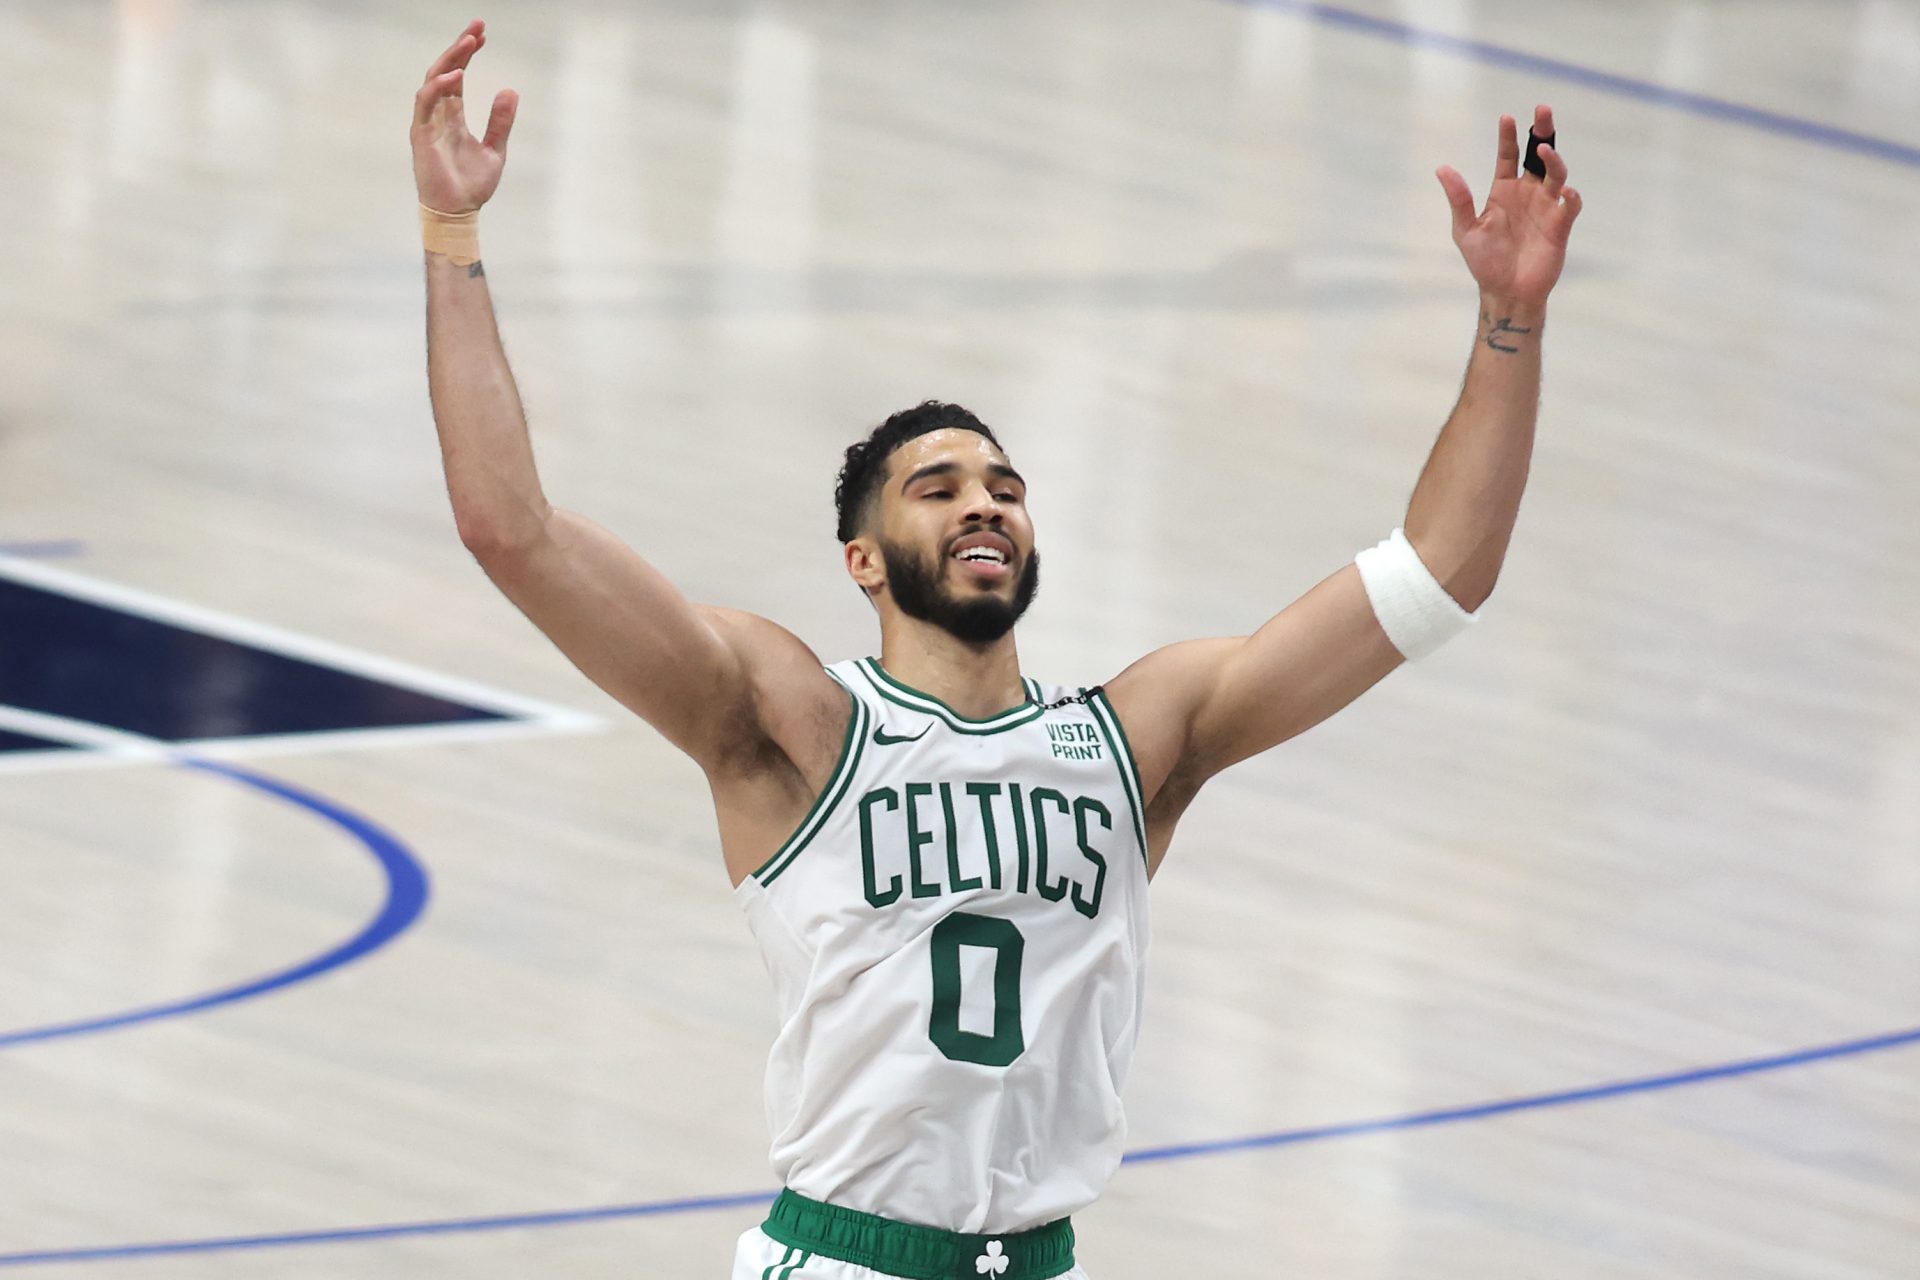 Ka-ching! Jayson Tatum signs the richest extension in NBA history